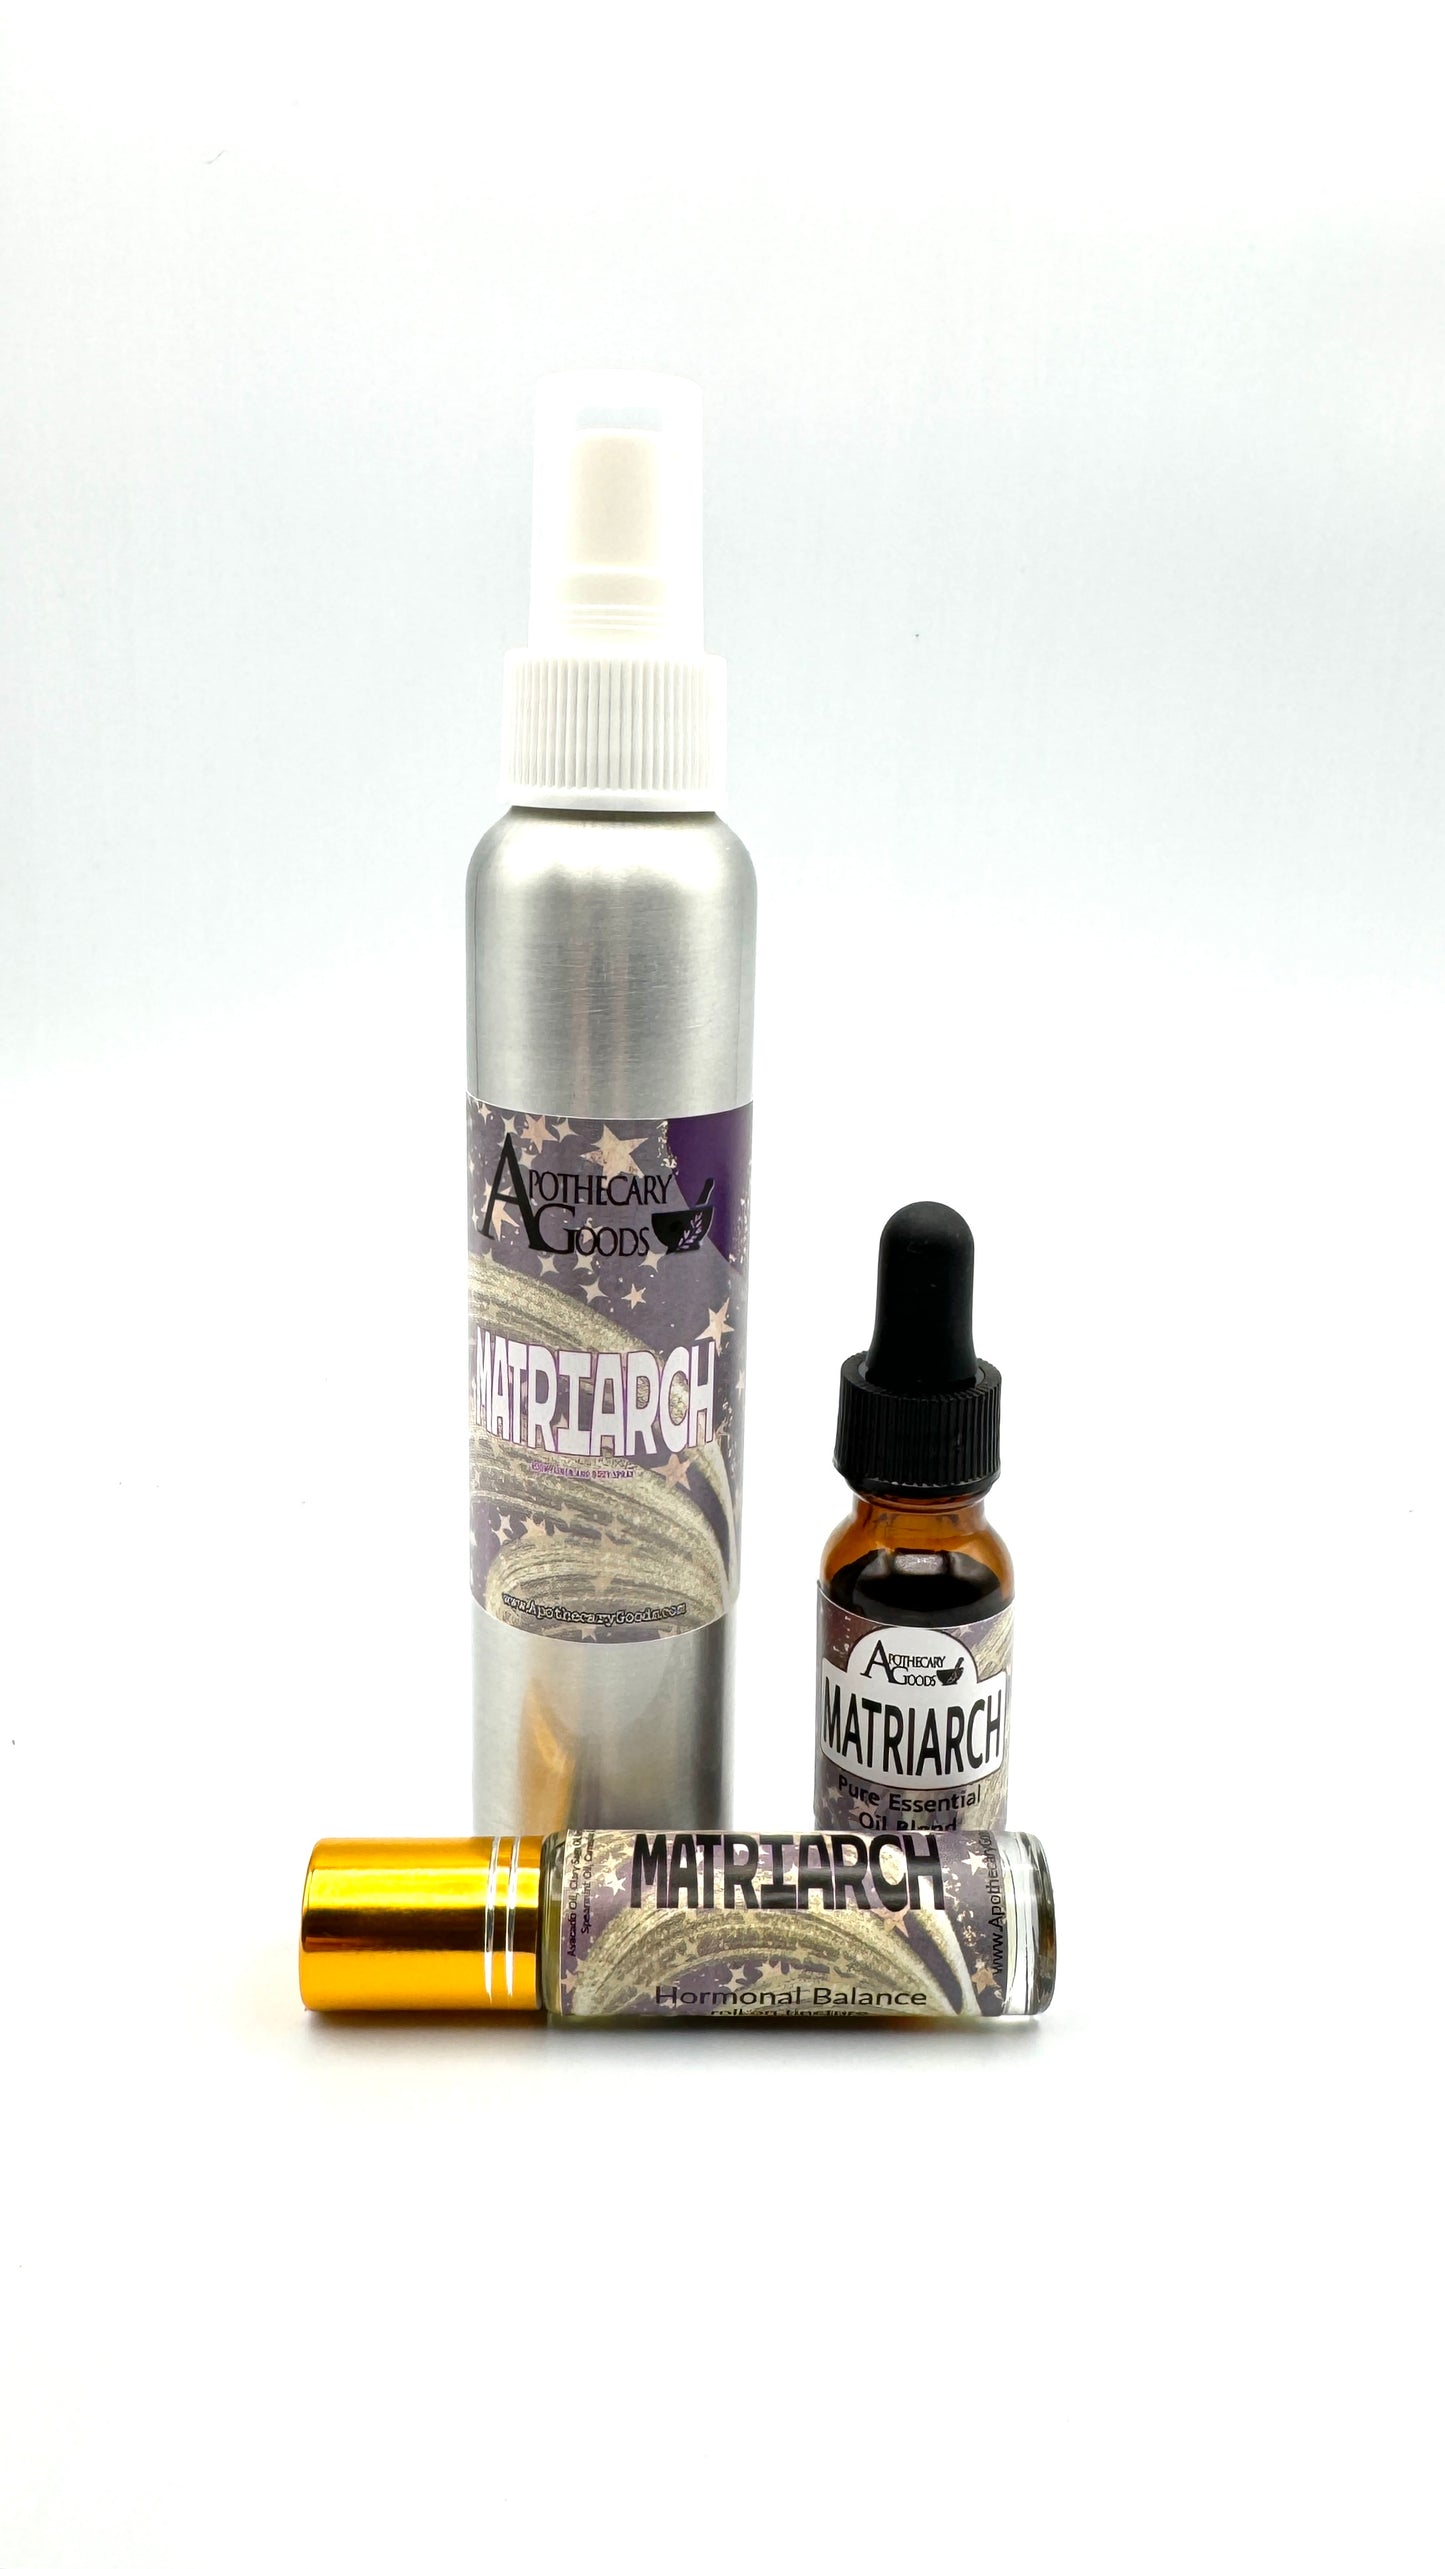 Matriarch: Exclusive Women's Wellness Collection by Apothecary Goods